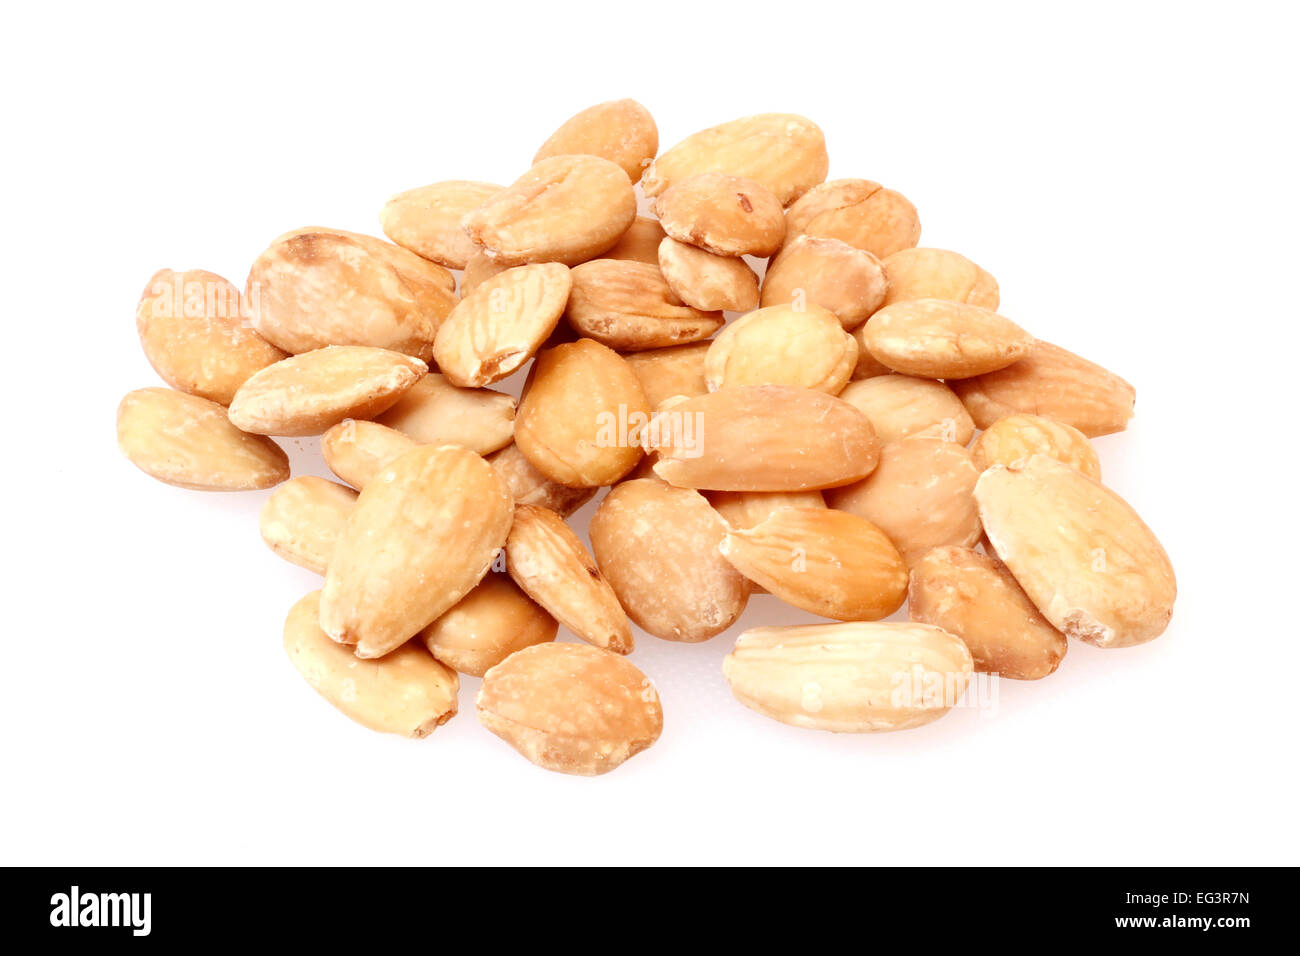 Delicious nutritious almonds nuts for hungry healthy Stock Photo